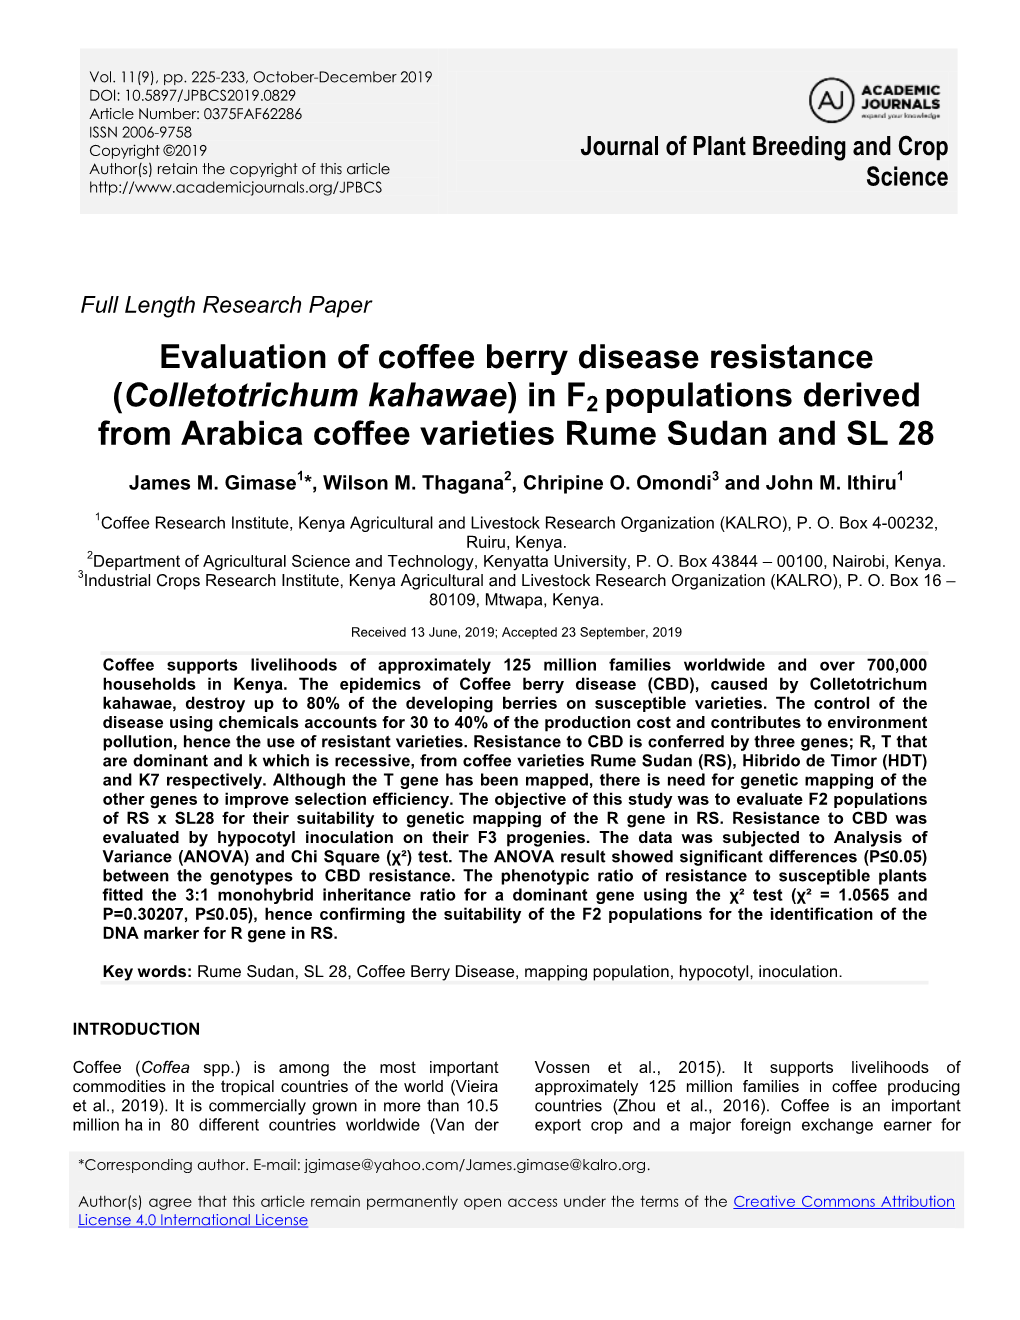 Evaluation of Coffee Berry Disease Resistance (Colletotrichum Kahawae) in F2 Populations Derived from Arabica Coffee Varieties Rume Sudan and SL 28